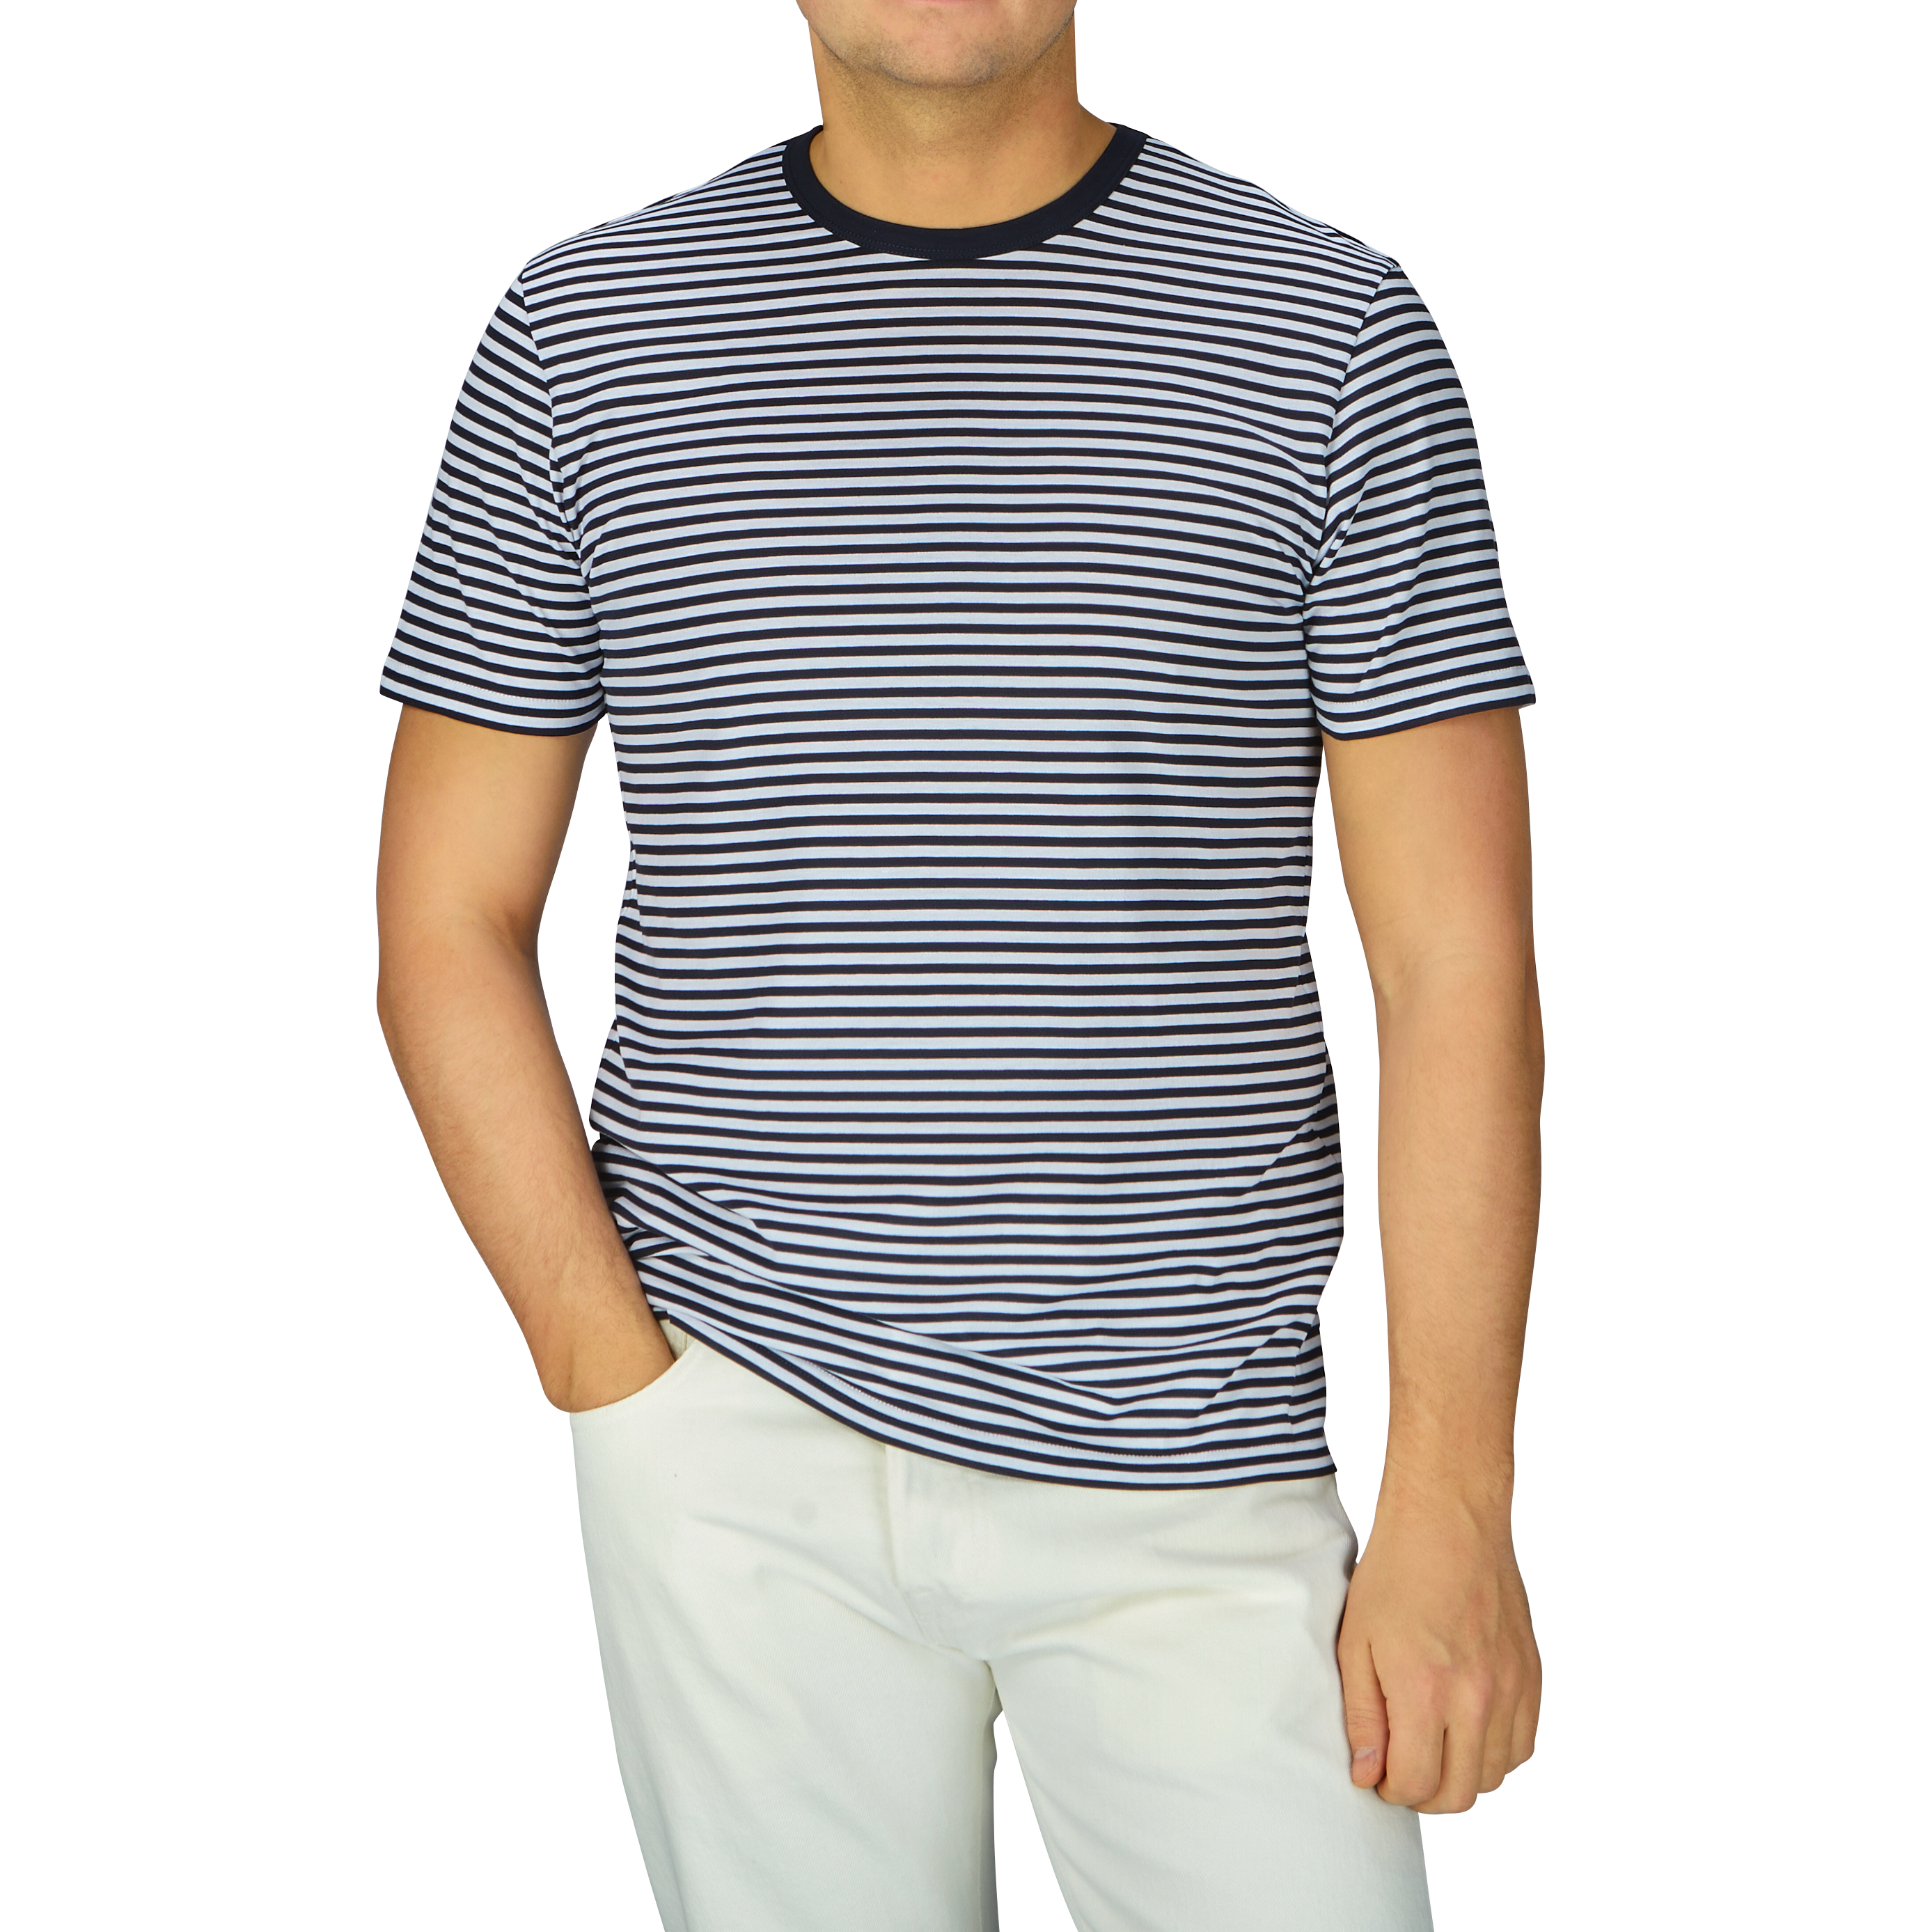 A man wearing a comfortable Navy White Striped Classic Cotton T-Shirt by Sunspel and white pants.